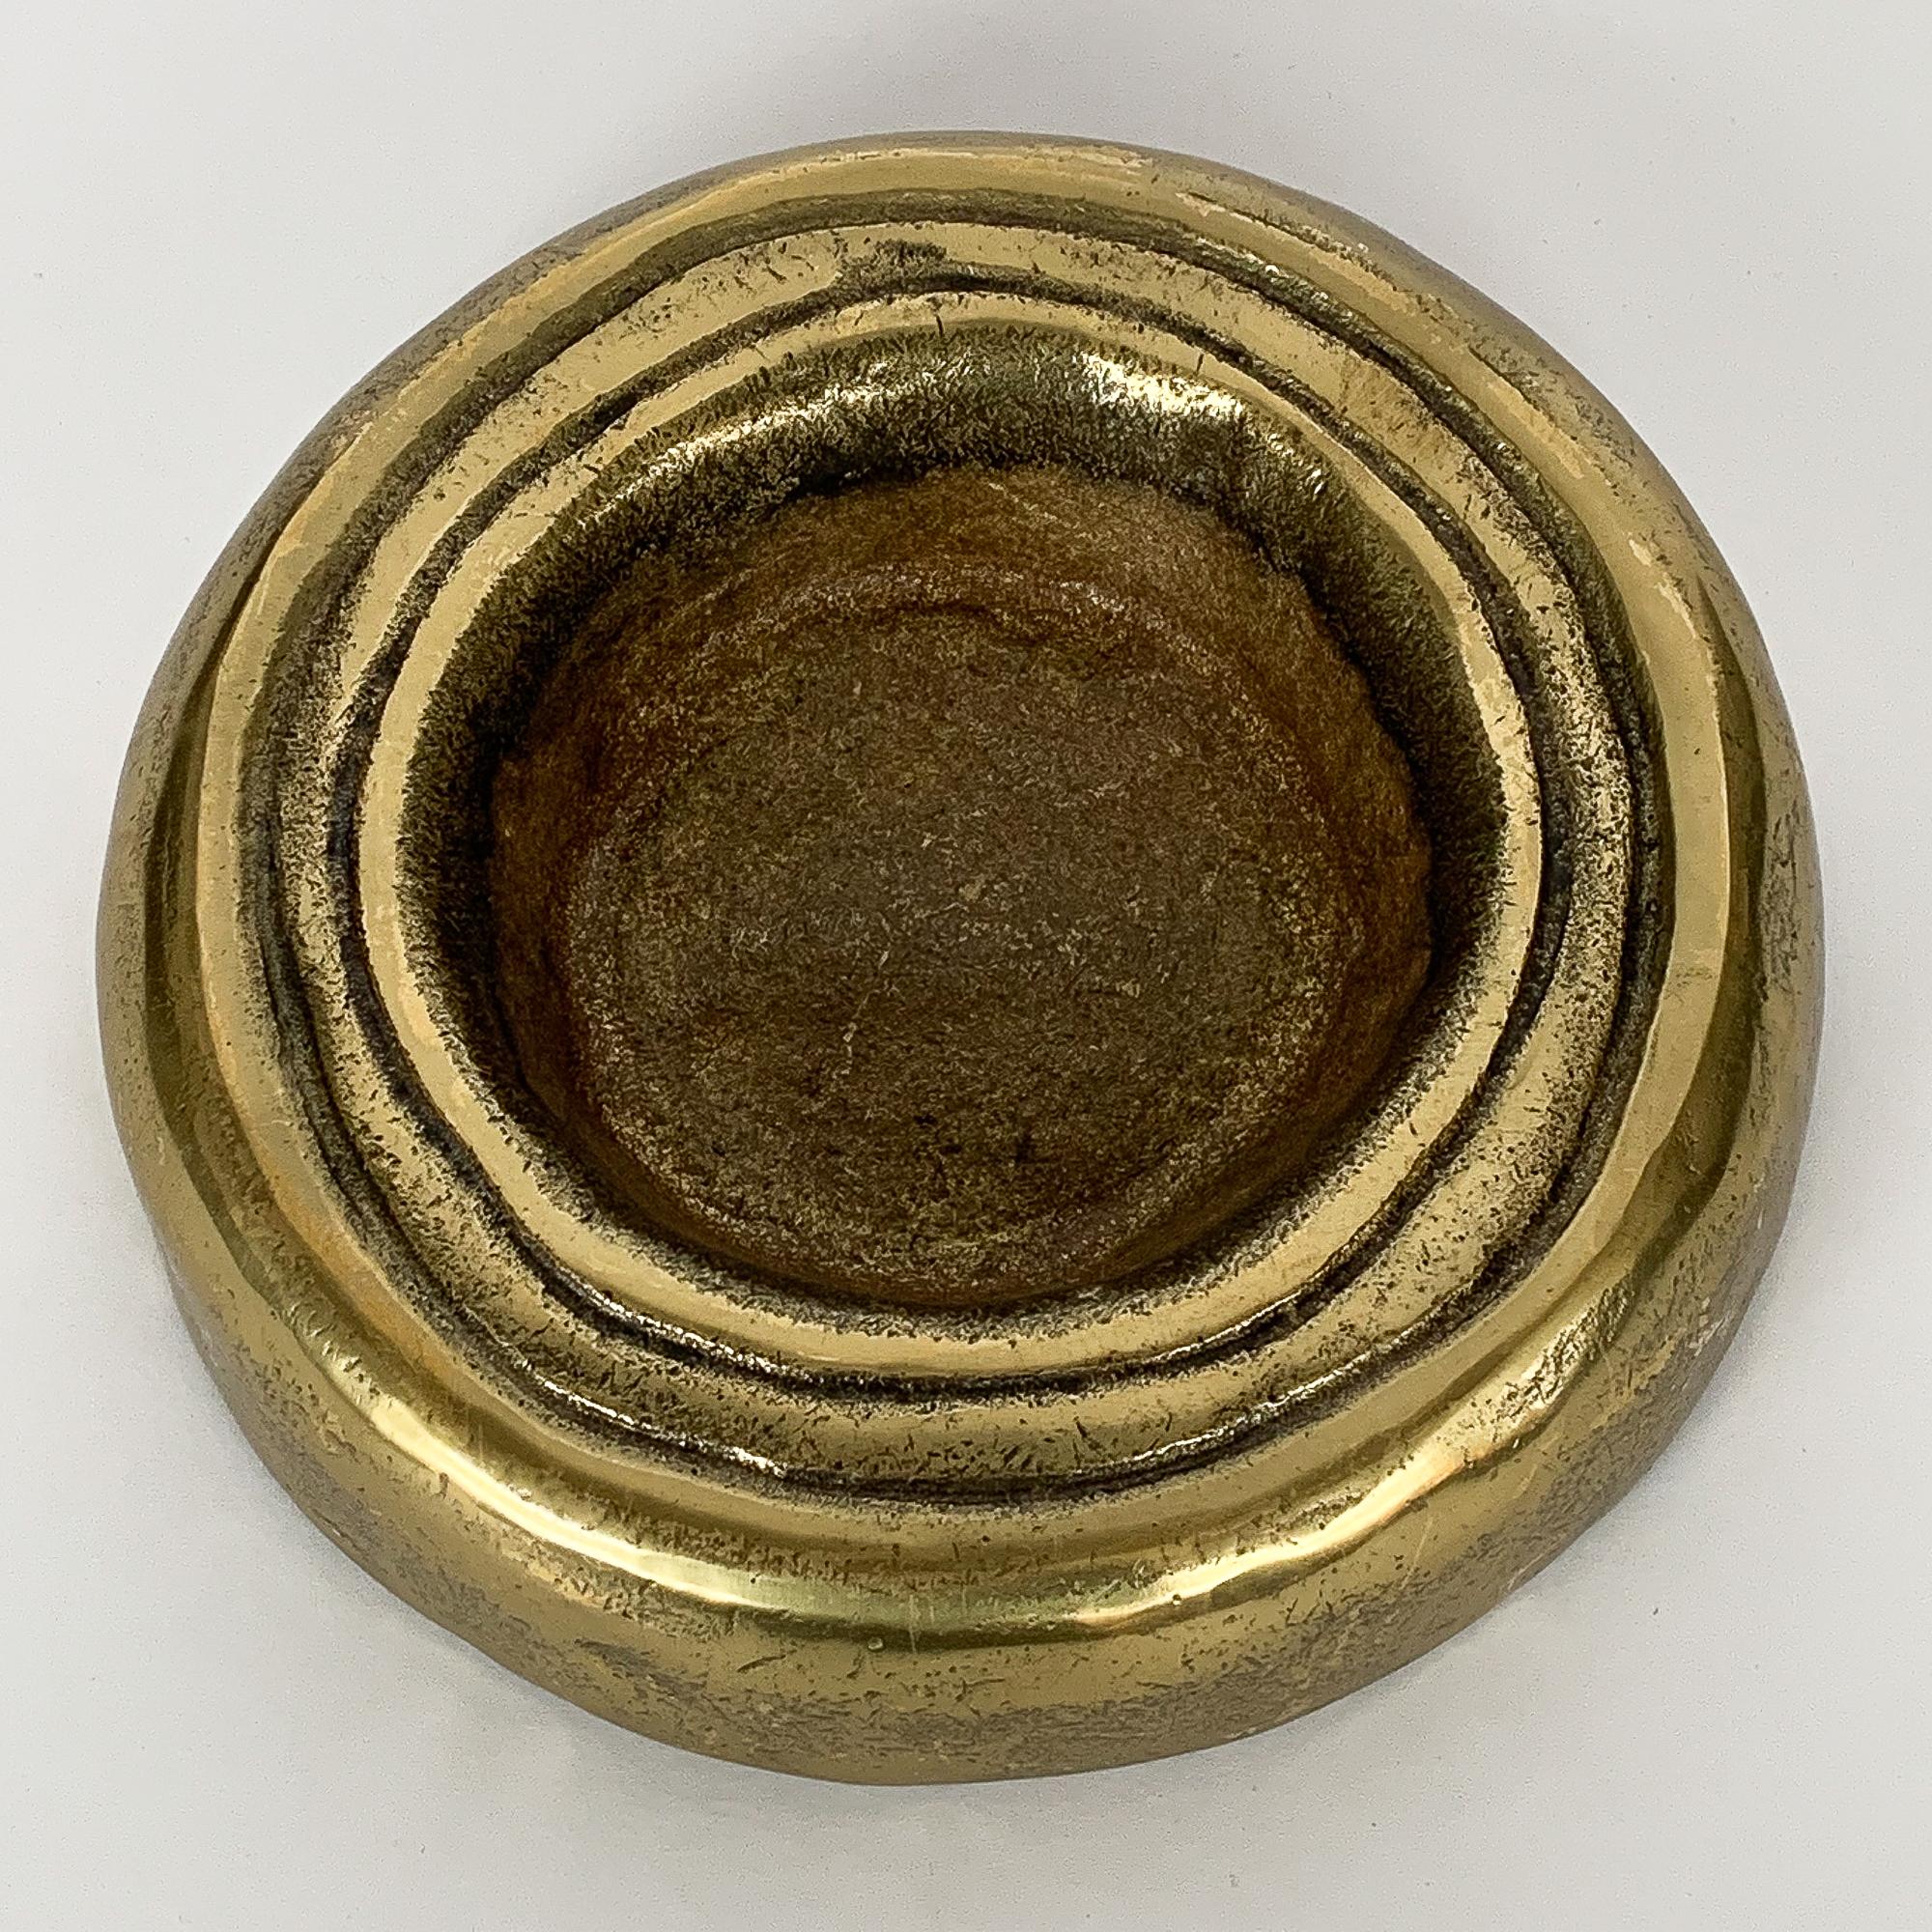 A solid cast brass bowl or vide poche in the Brutalist style, circa 1960s. Round 7